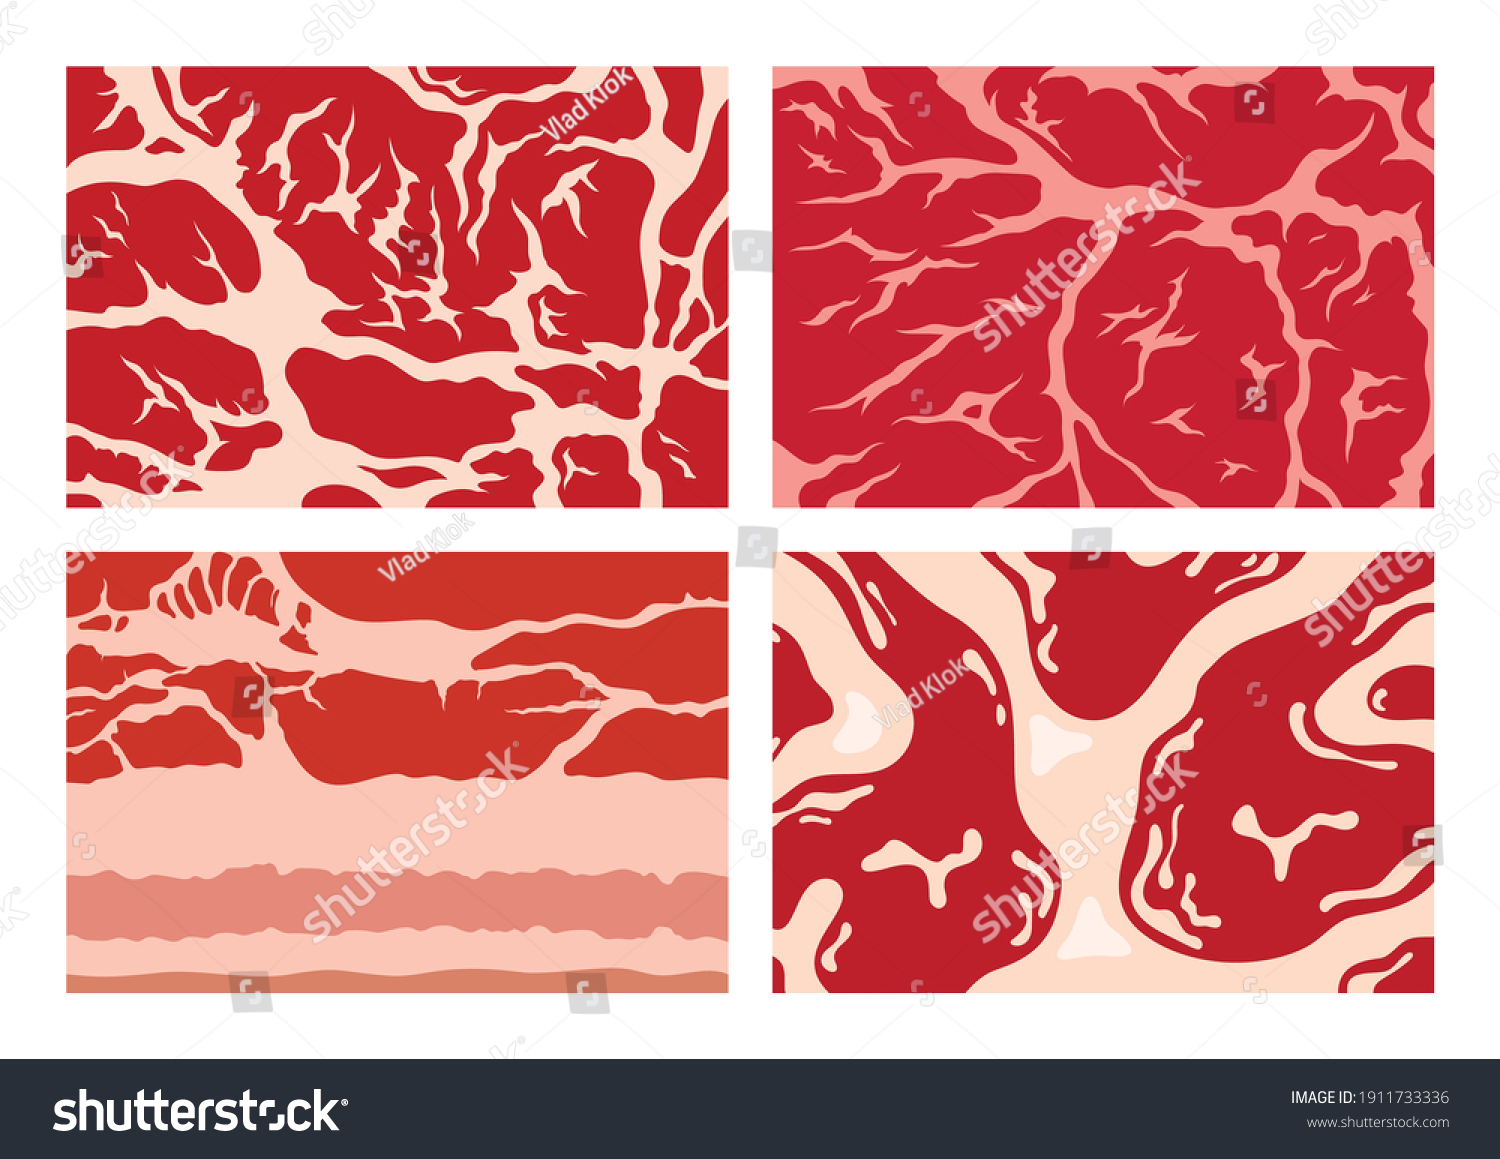 Vector meat background or pattern collection. Beef, pork and lamb meat textures for meat industry, packing, marketing, packaging, etc #1911733336